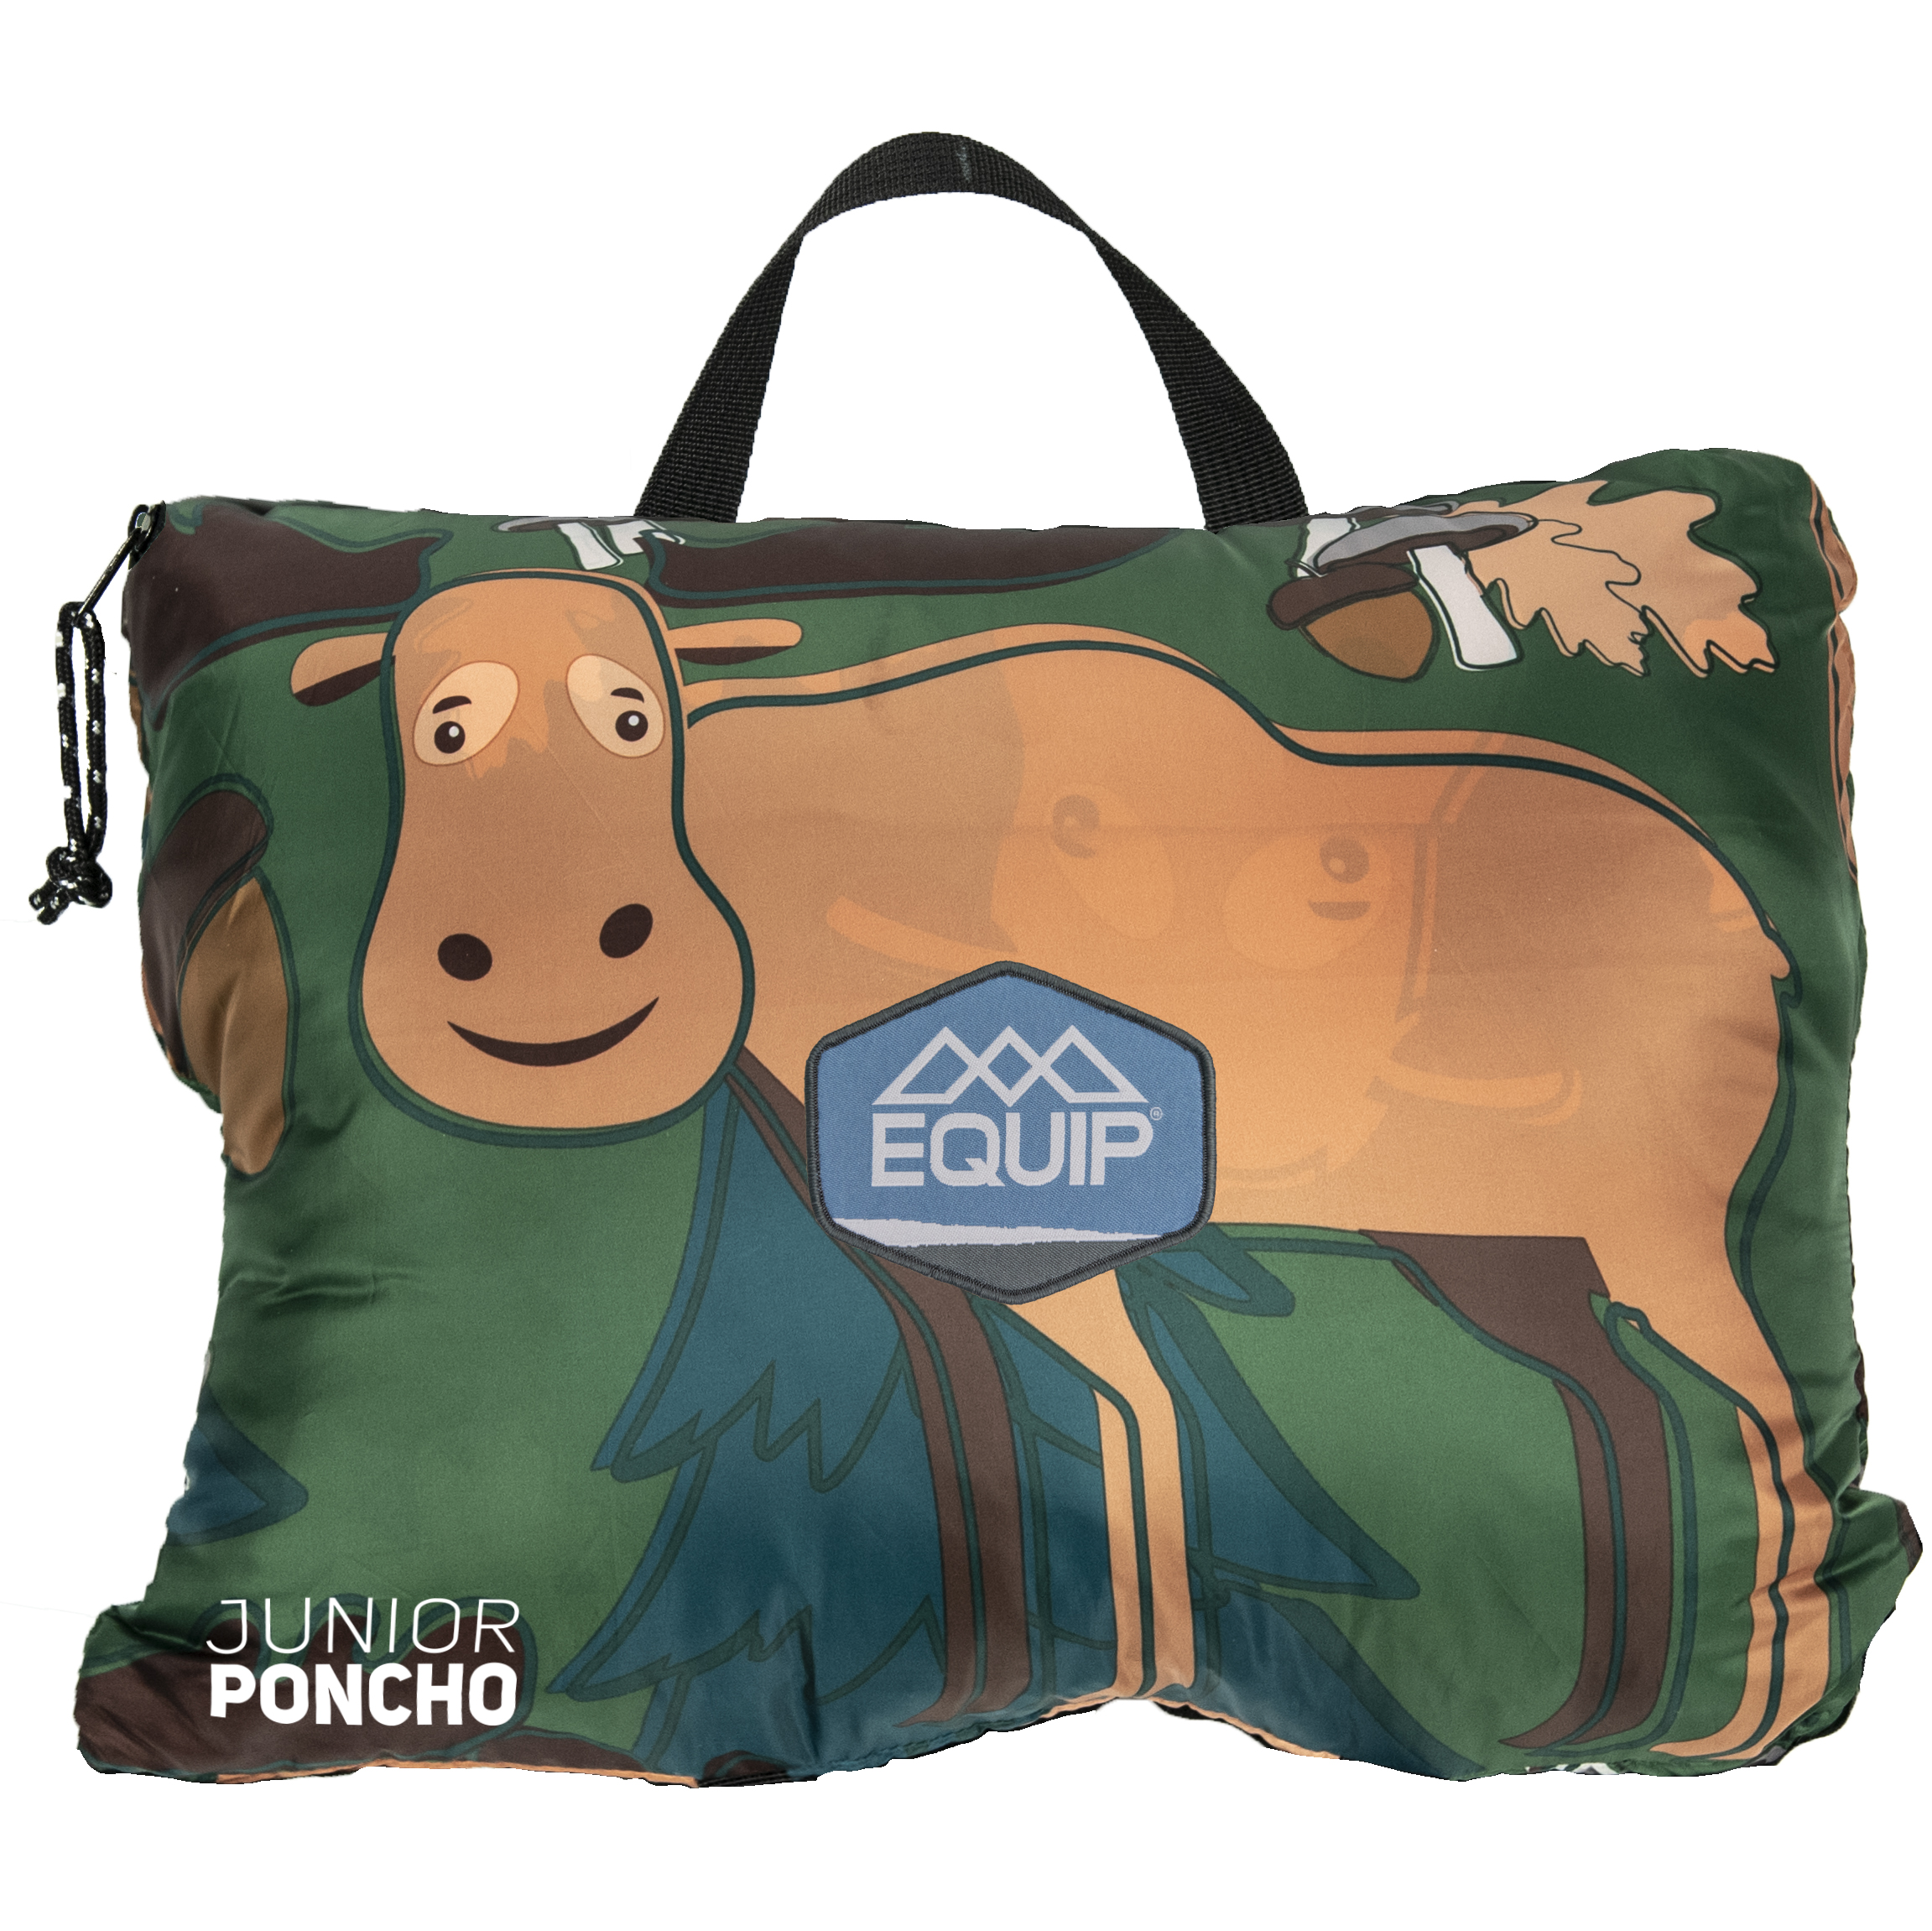 EQUIP Camping Poncho Picnic Blanket and Mat, Green Moose Print, Size 66.9 In. L x 51.18 In. Material Polyester - image 2 of 8